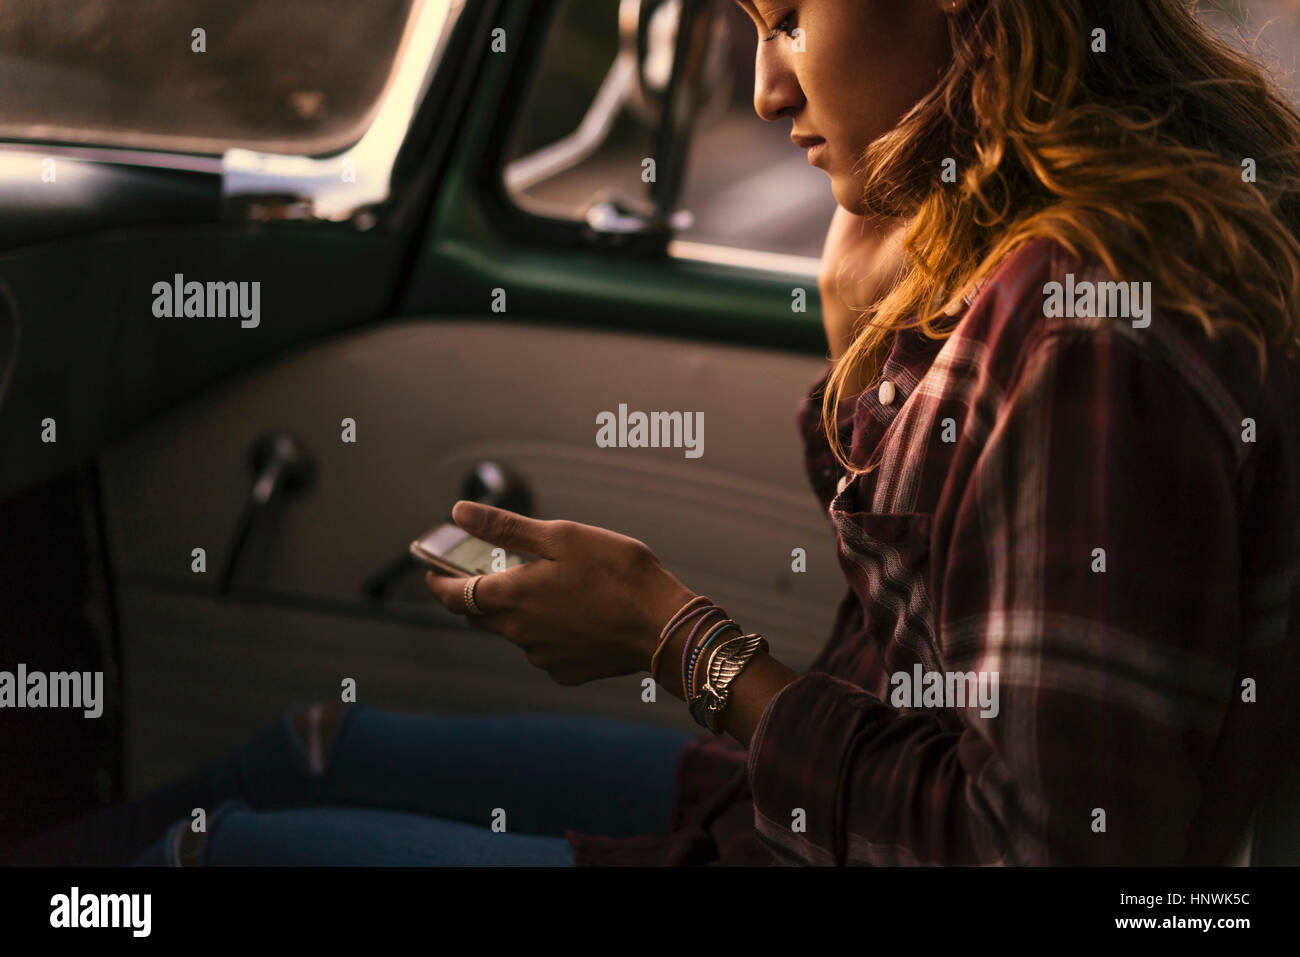 Young woman looking at smartphone in front seat of pickup truck at Newport Beach, California, USA Stock Photo